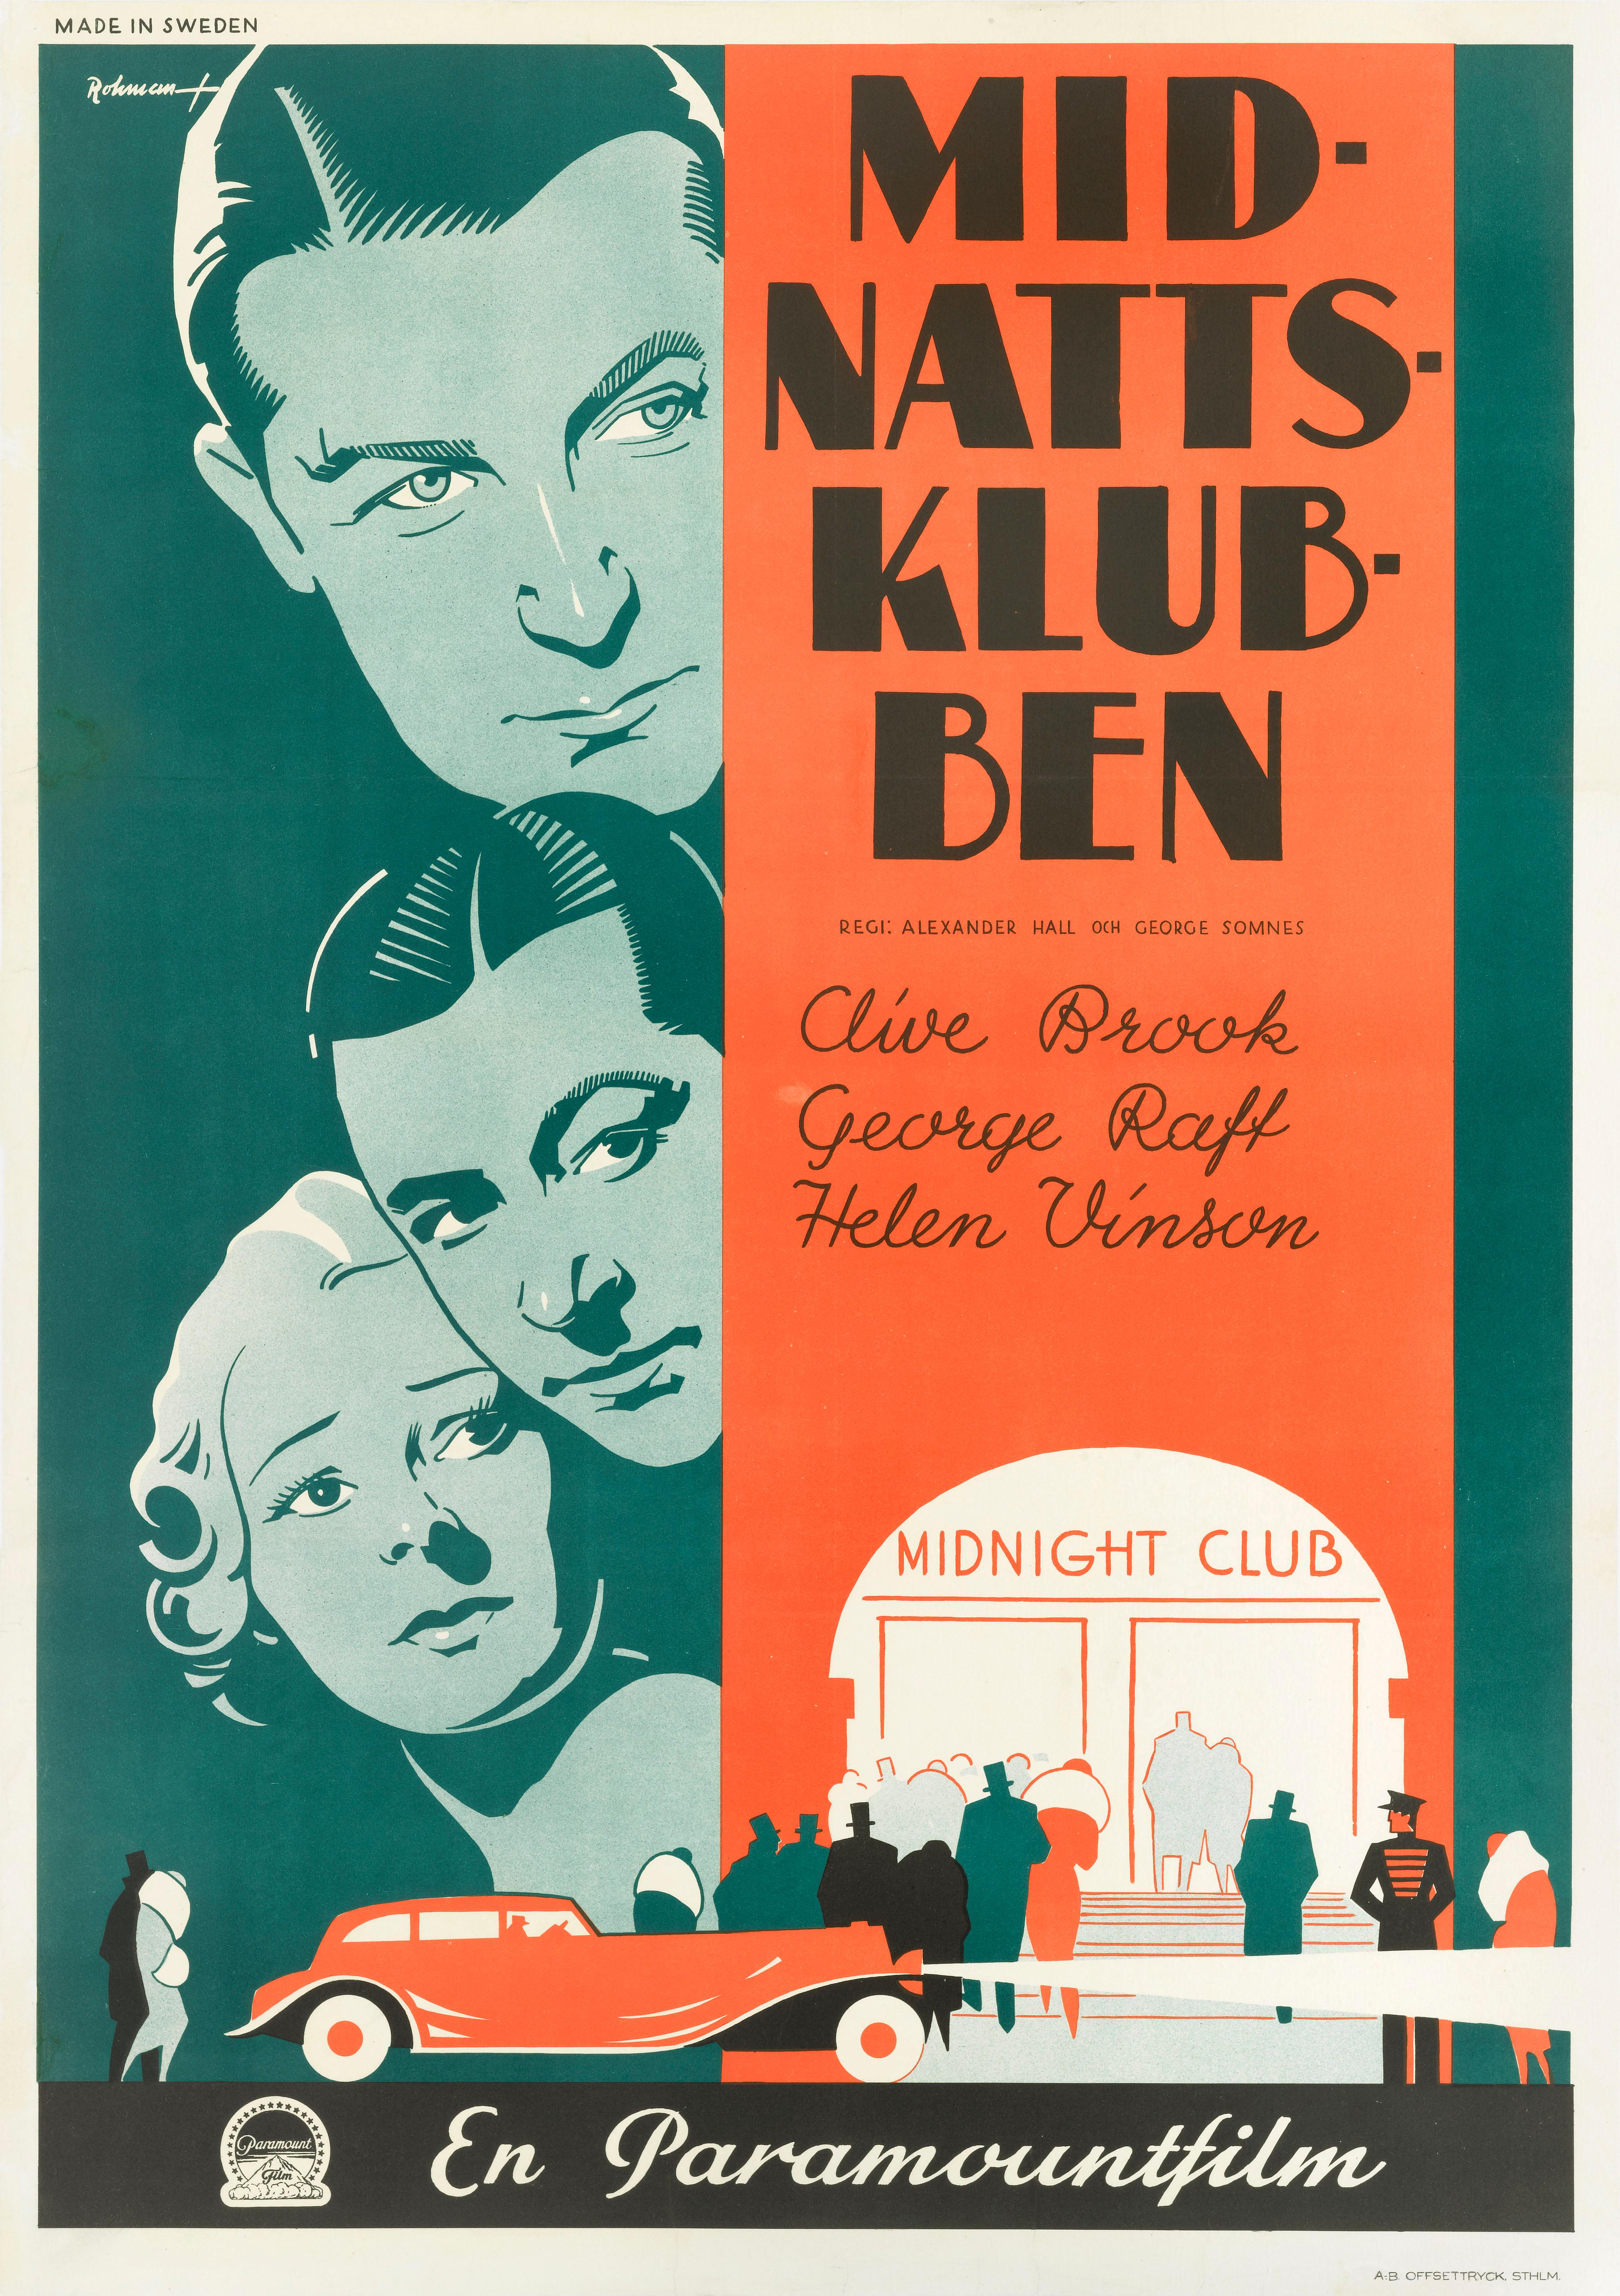 Original Swedish film poster for American crime, drama film Midnight Club, 1933.
The film was directed by Alexander Hall and George Somnes and starred Clive Brook, Gorge Raff and Helen Vinson.
This striking Swedish poster was created for the films